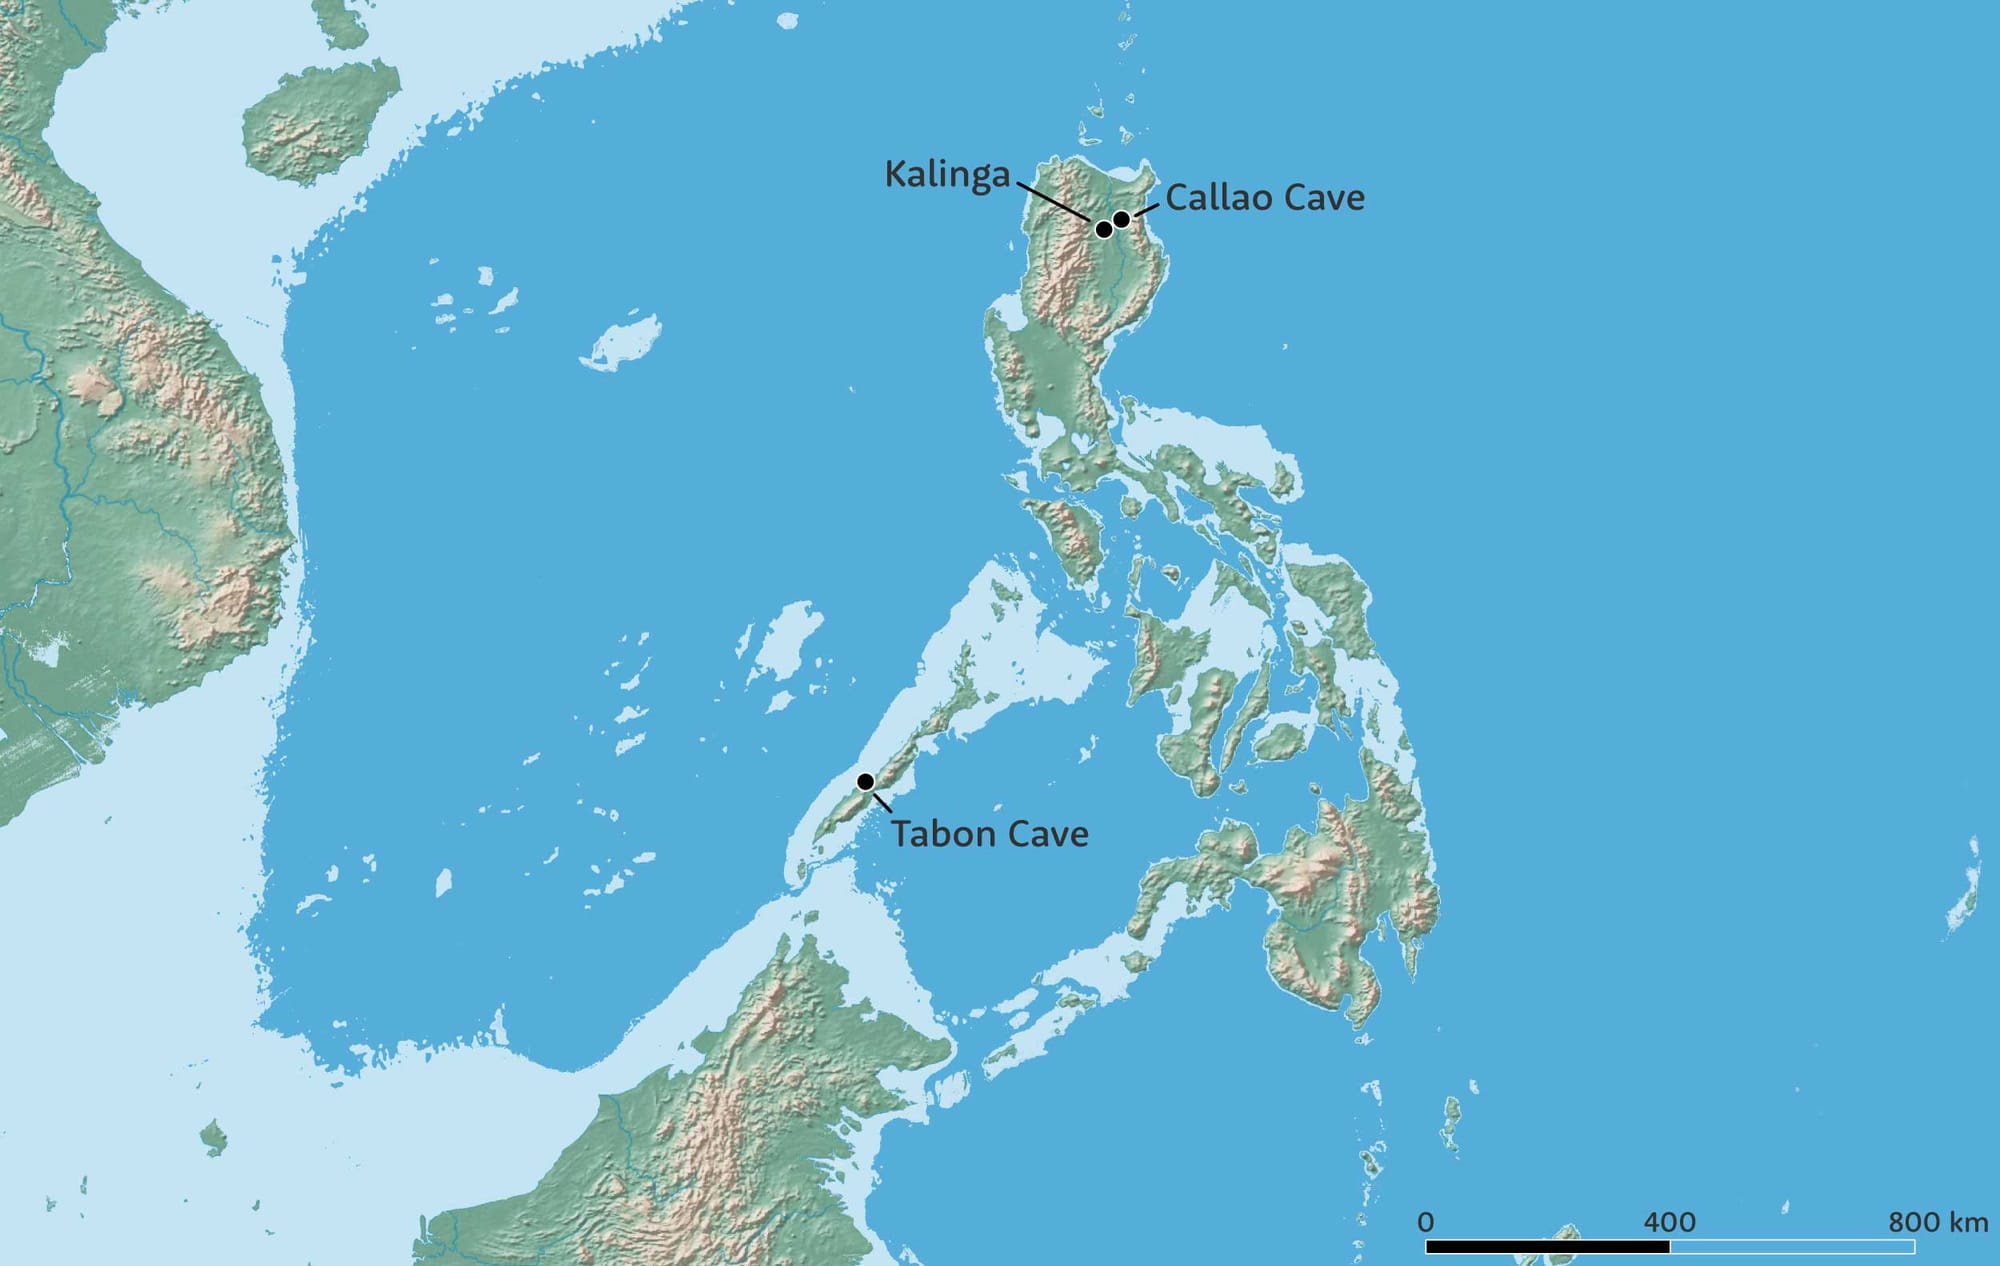 Map of the Philippines and surrounding area, showing locations of Kalinga and Callao Cave on Luzon, and Tabon Cave on Palawan